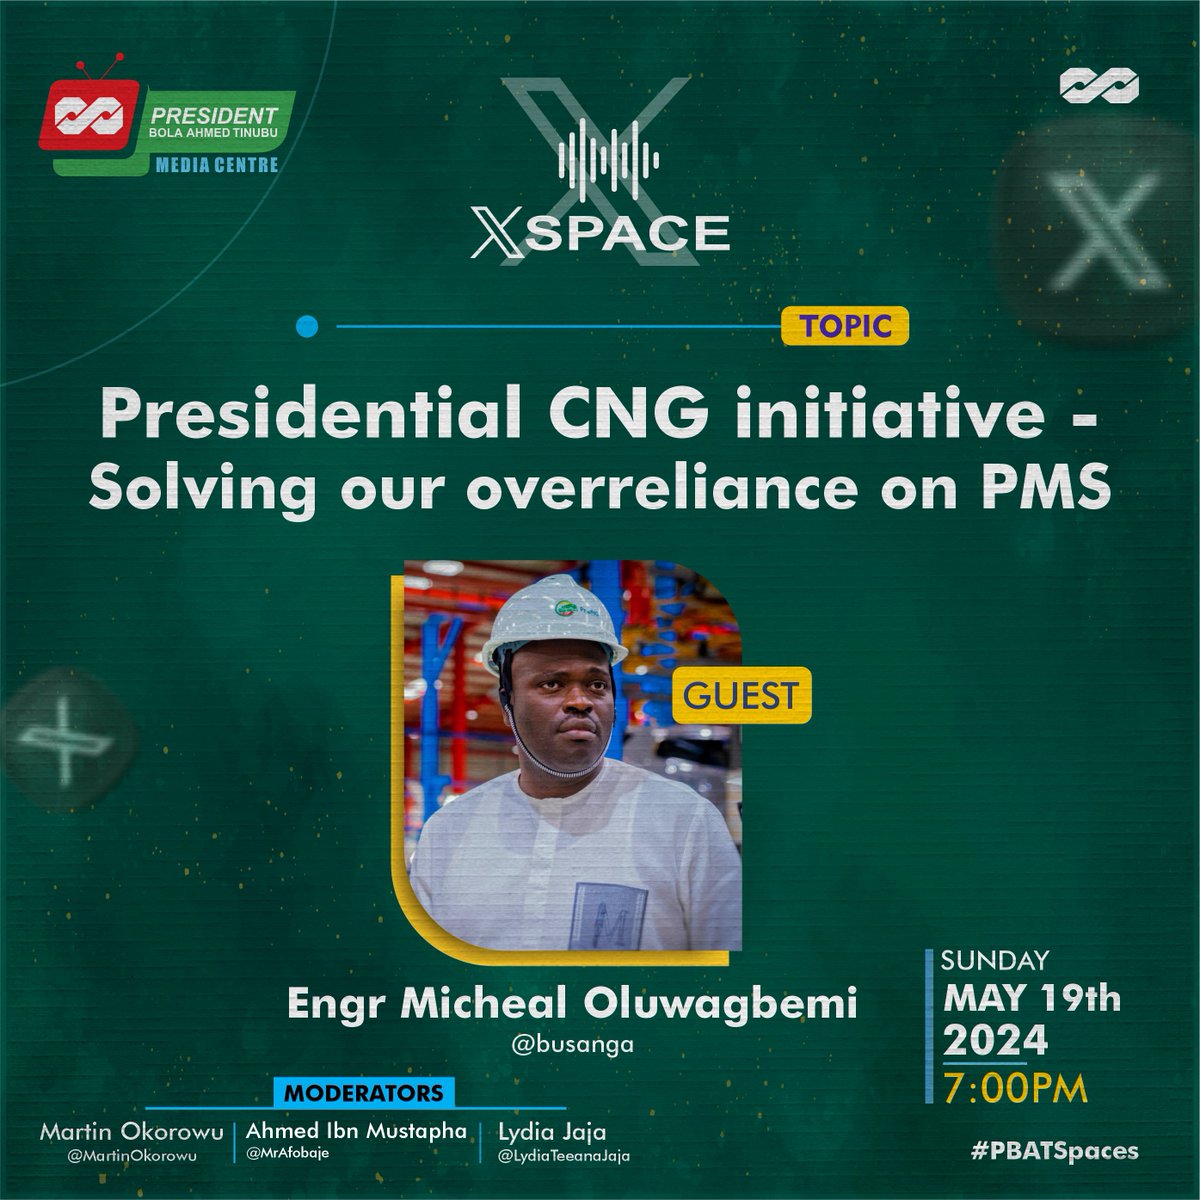 Let’s talk about CNG. Let’s talk about Nigeria’s green energy drive. Let’s talk about economic diversification. Join us this Sunday on this week’s edition of #PBATSpaces as we discuss everything CNG with @busanga, the Chairman of the Presidential CNG Initiative. Time: 7pm